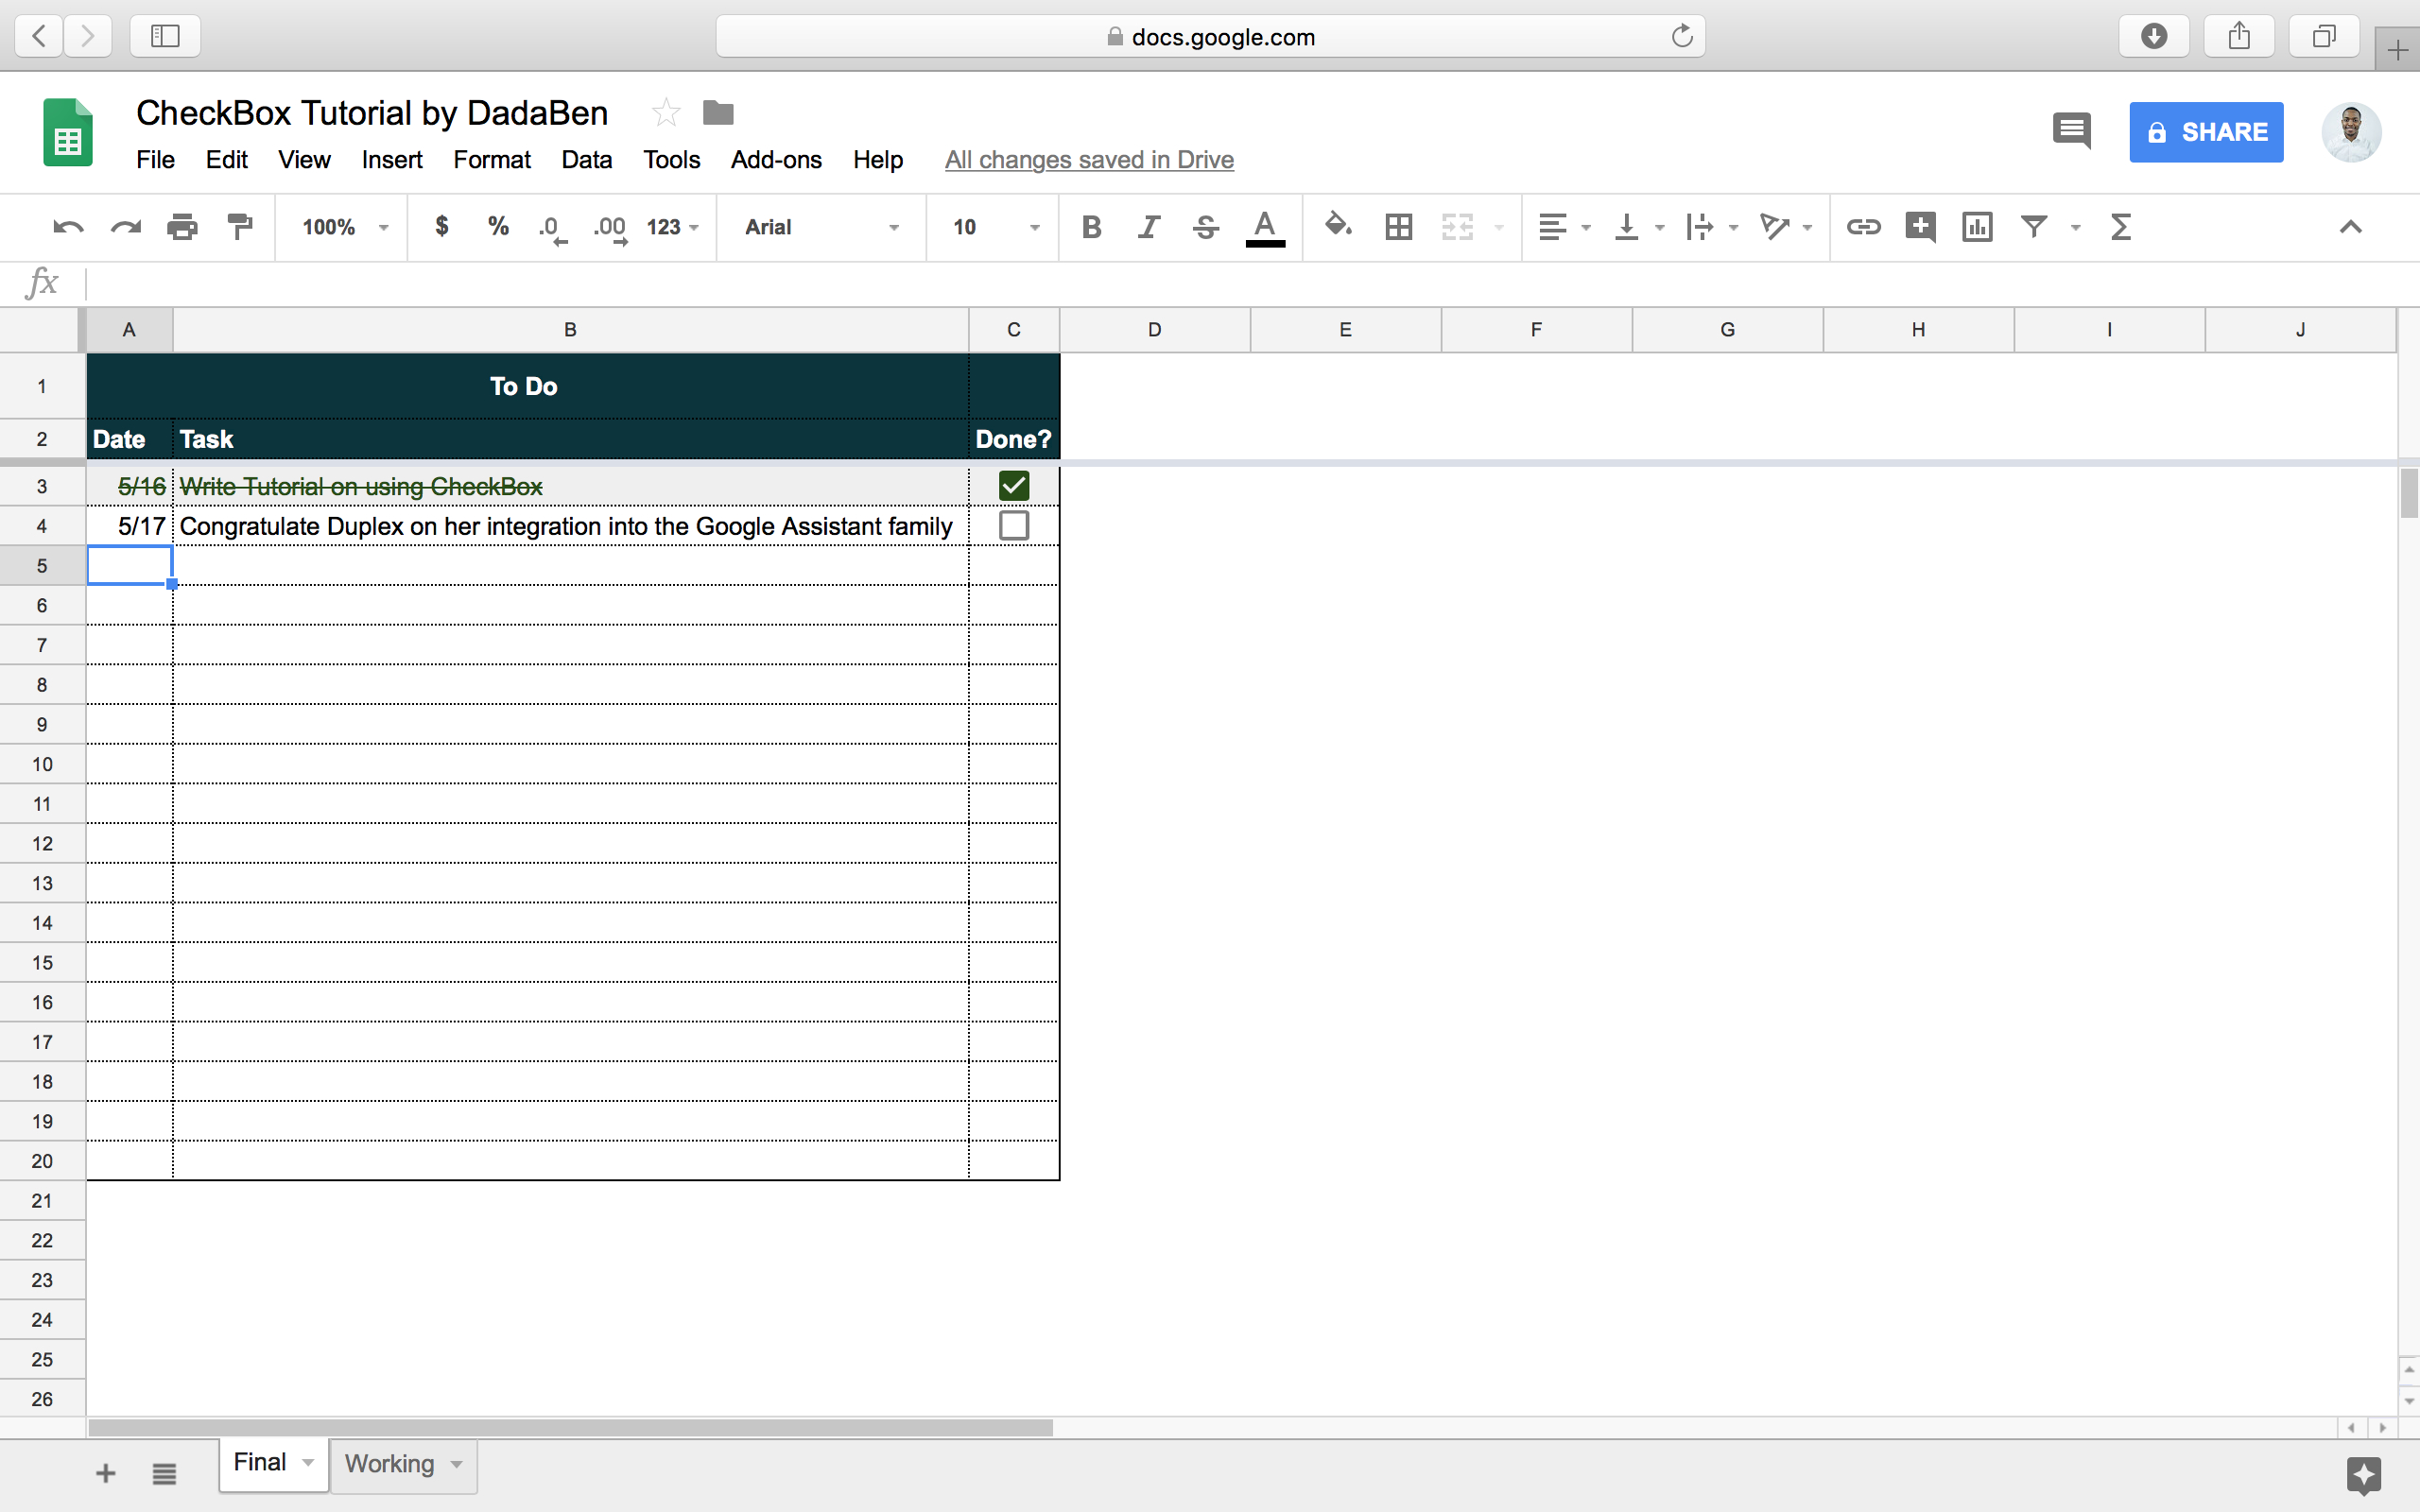 To Do List Spreadsheet For Tutorial: How To Build Your Own Beautiful Todo List Sheet